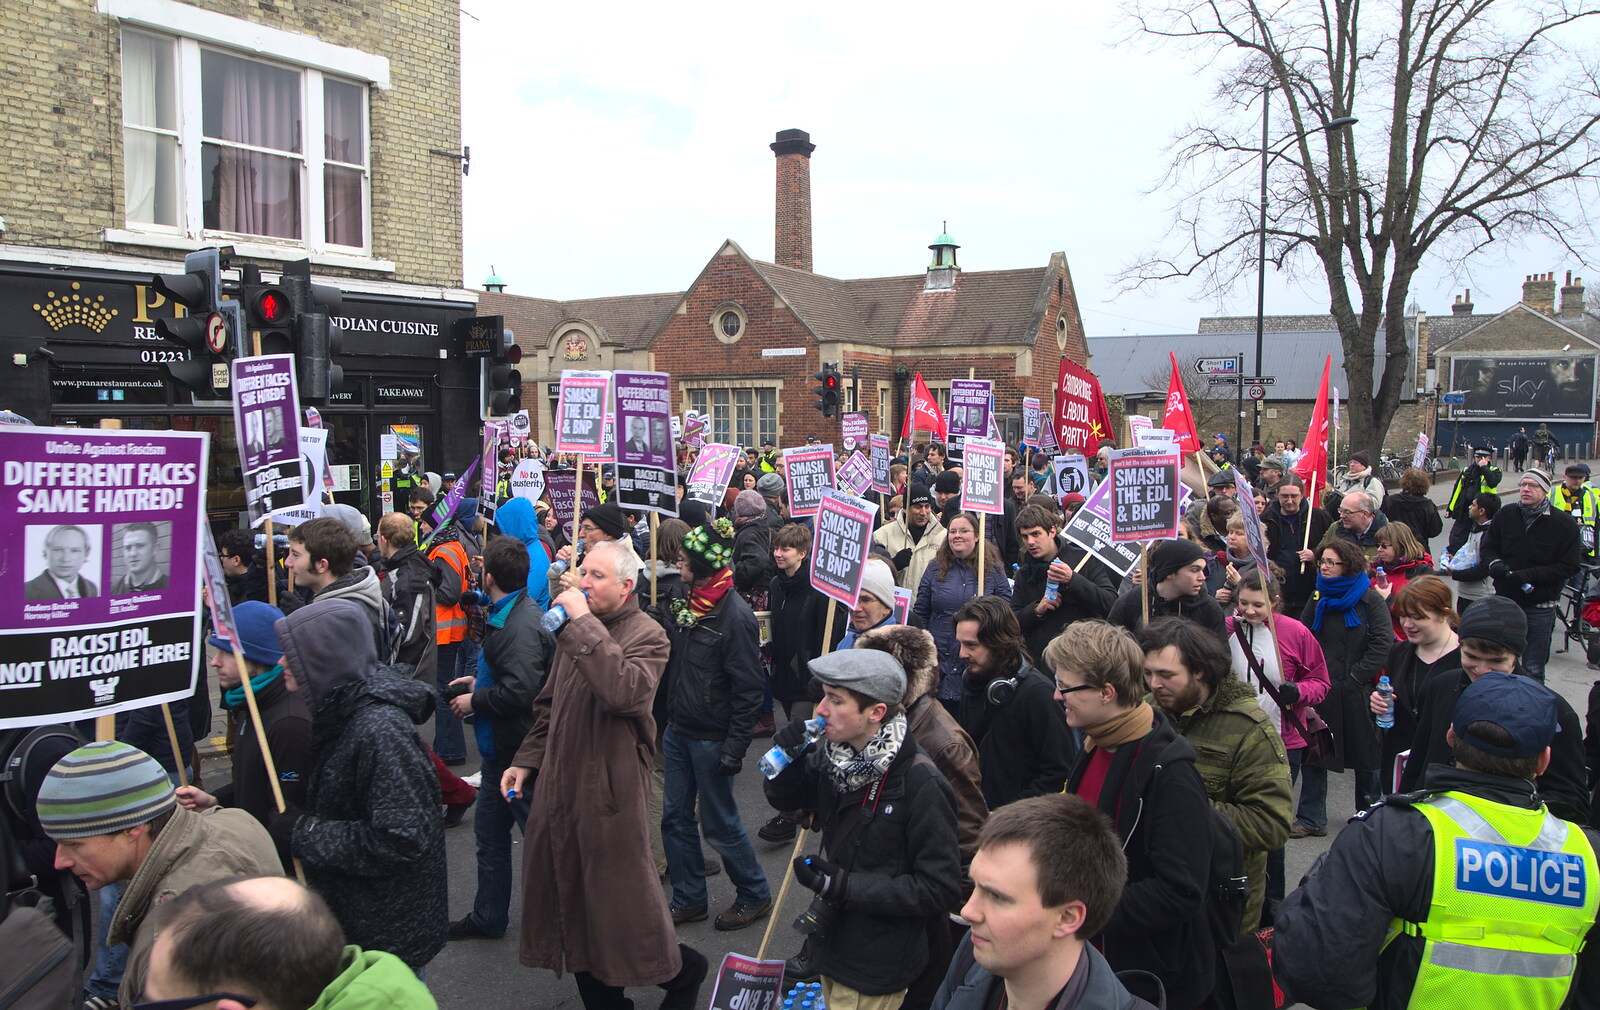 The march sets off up Mill road from An Anti-Fascist March, Mill Road, Cambridge - 23rd February 2013